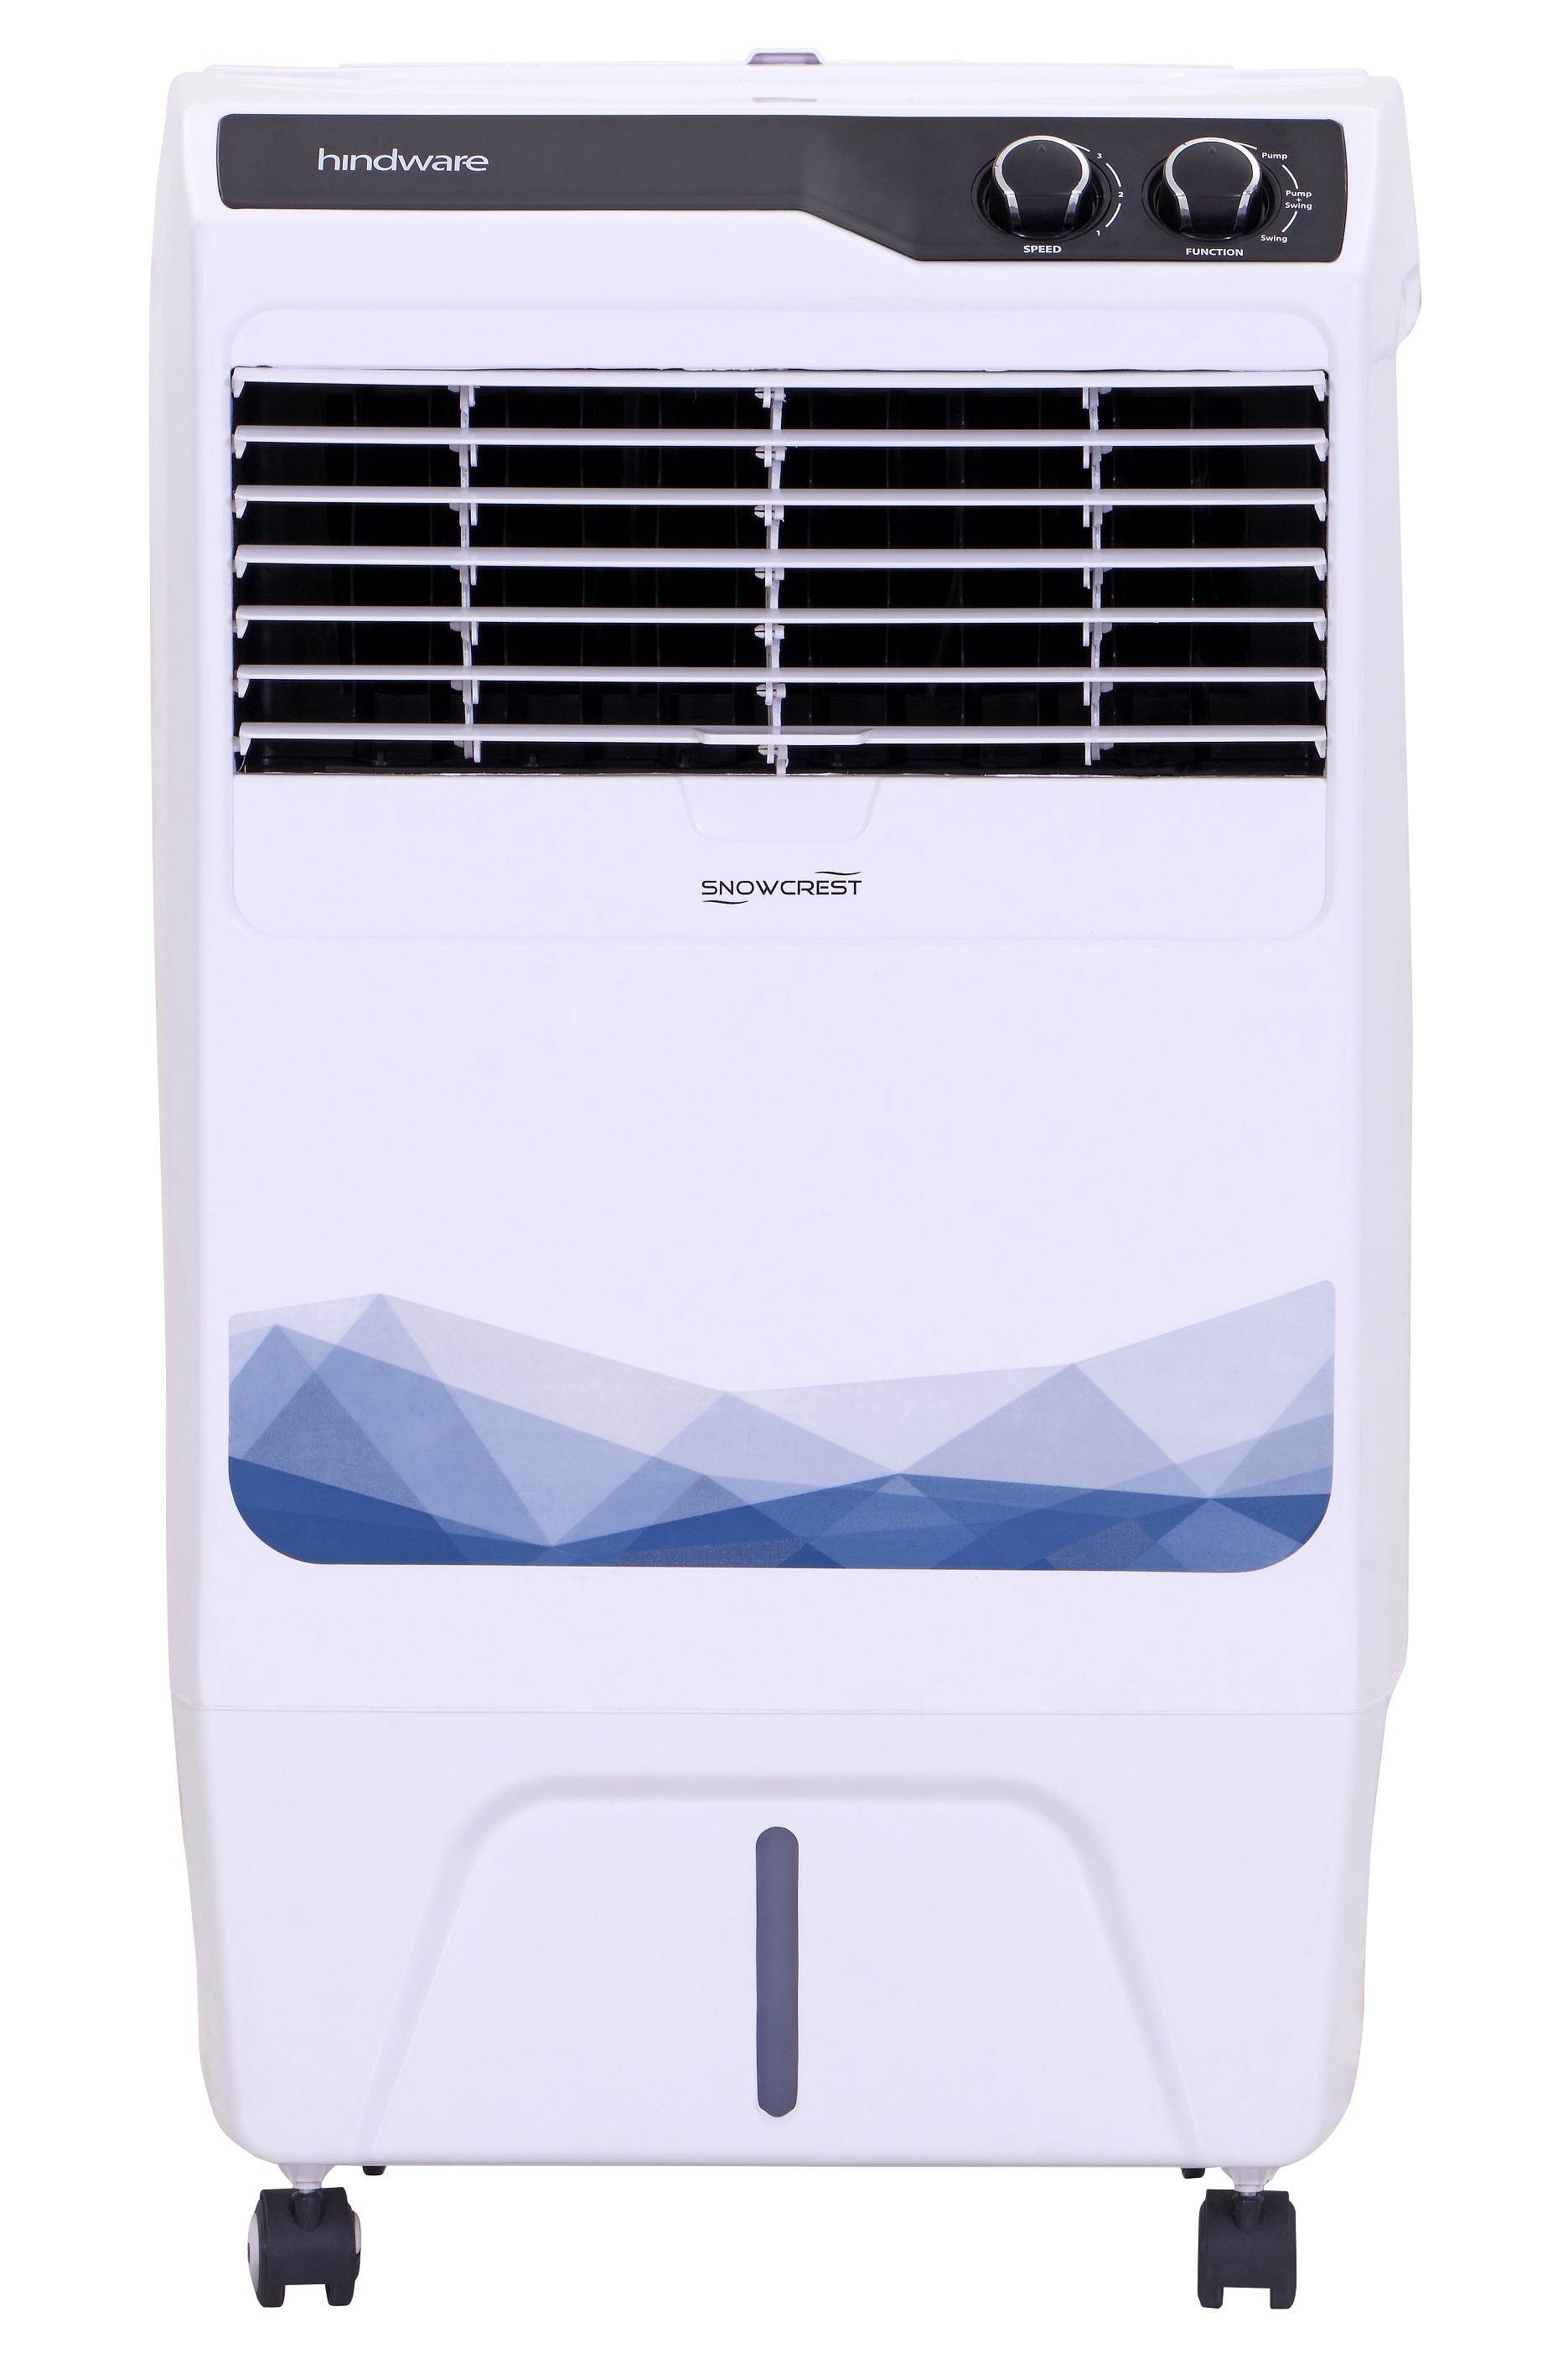 cheap rate air coolers